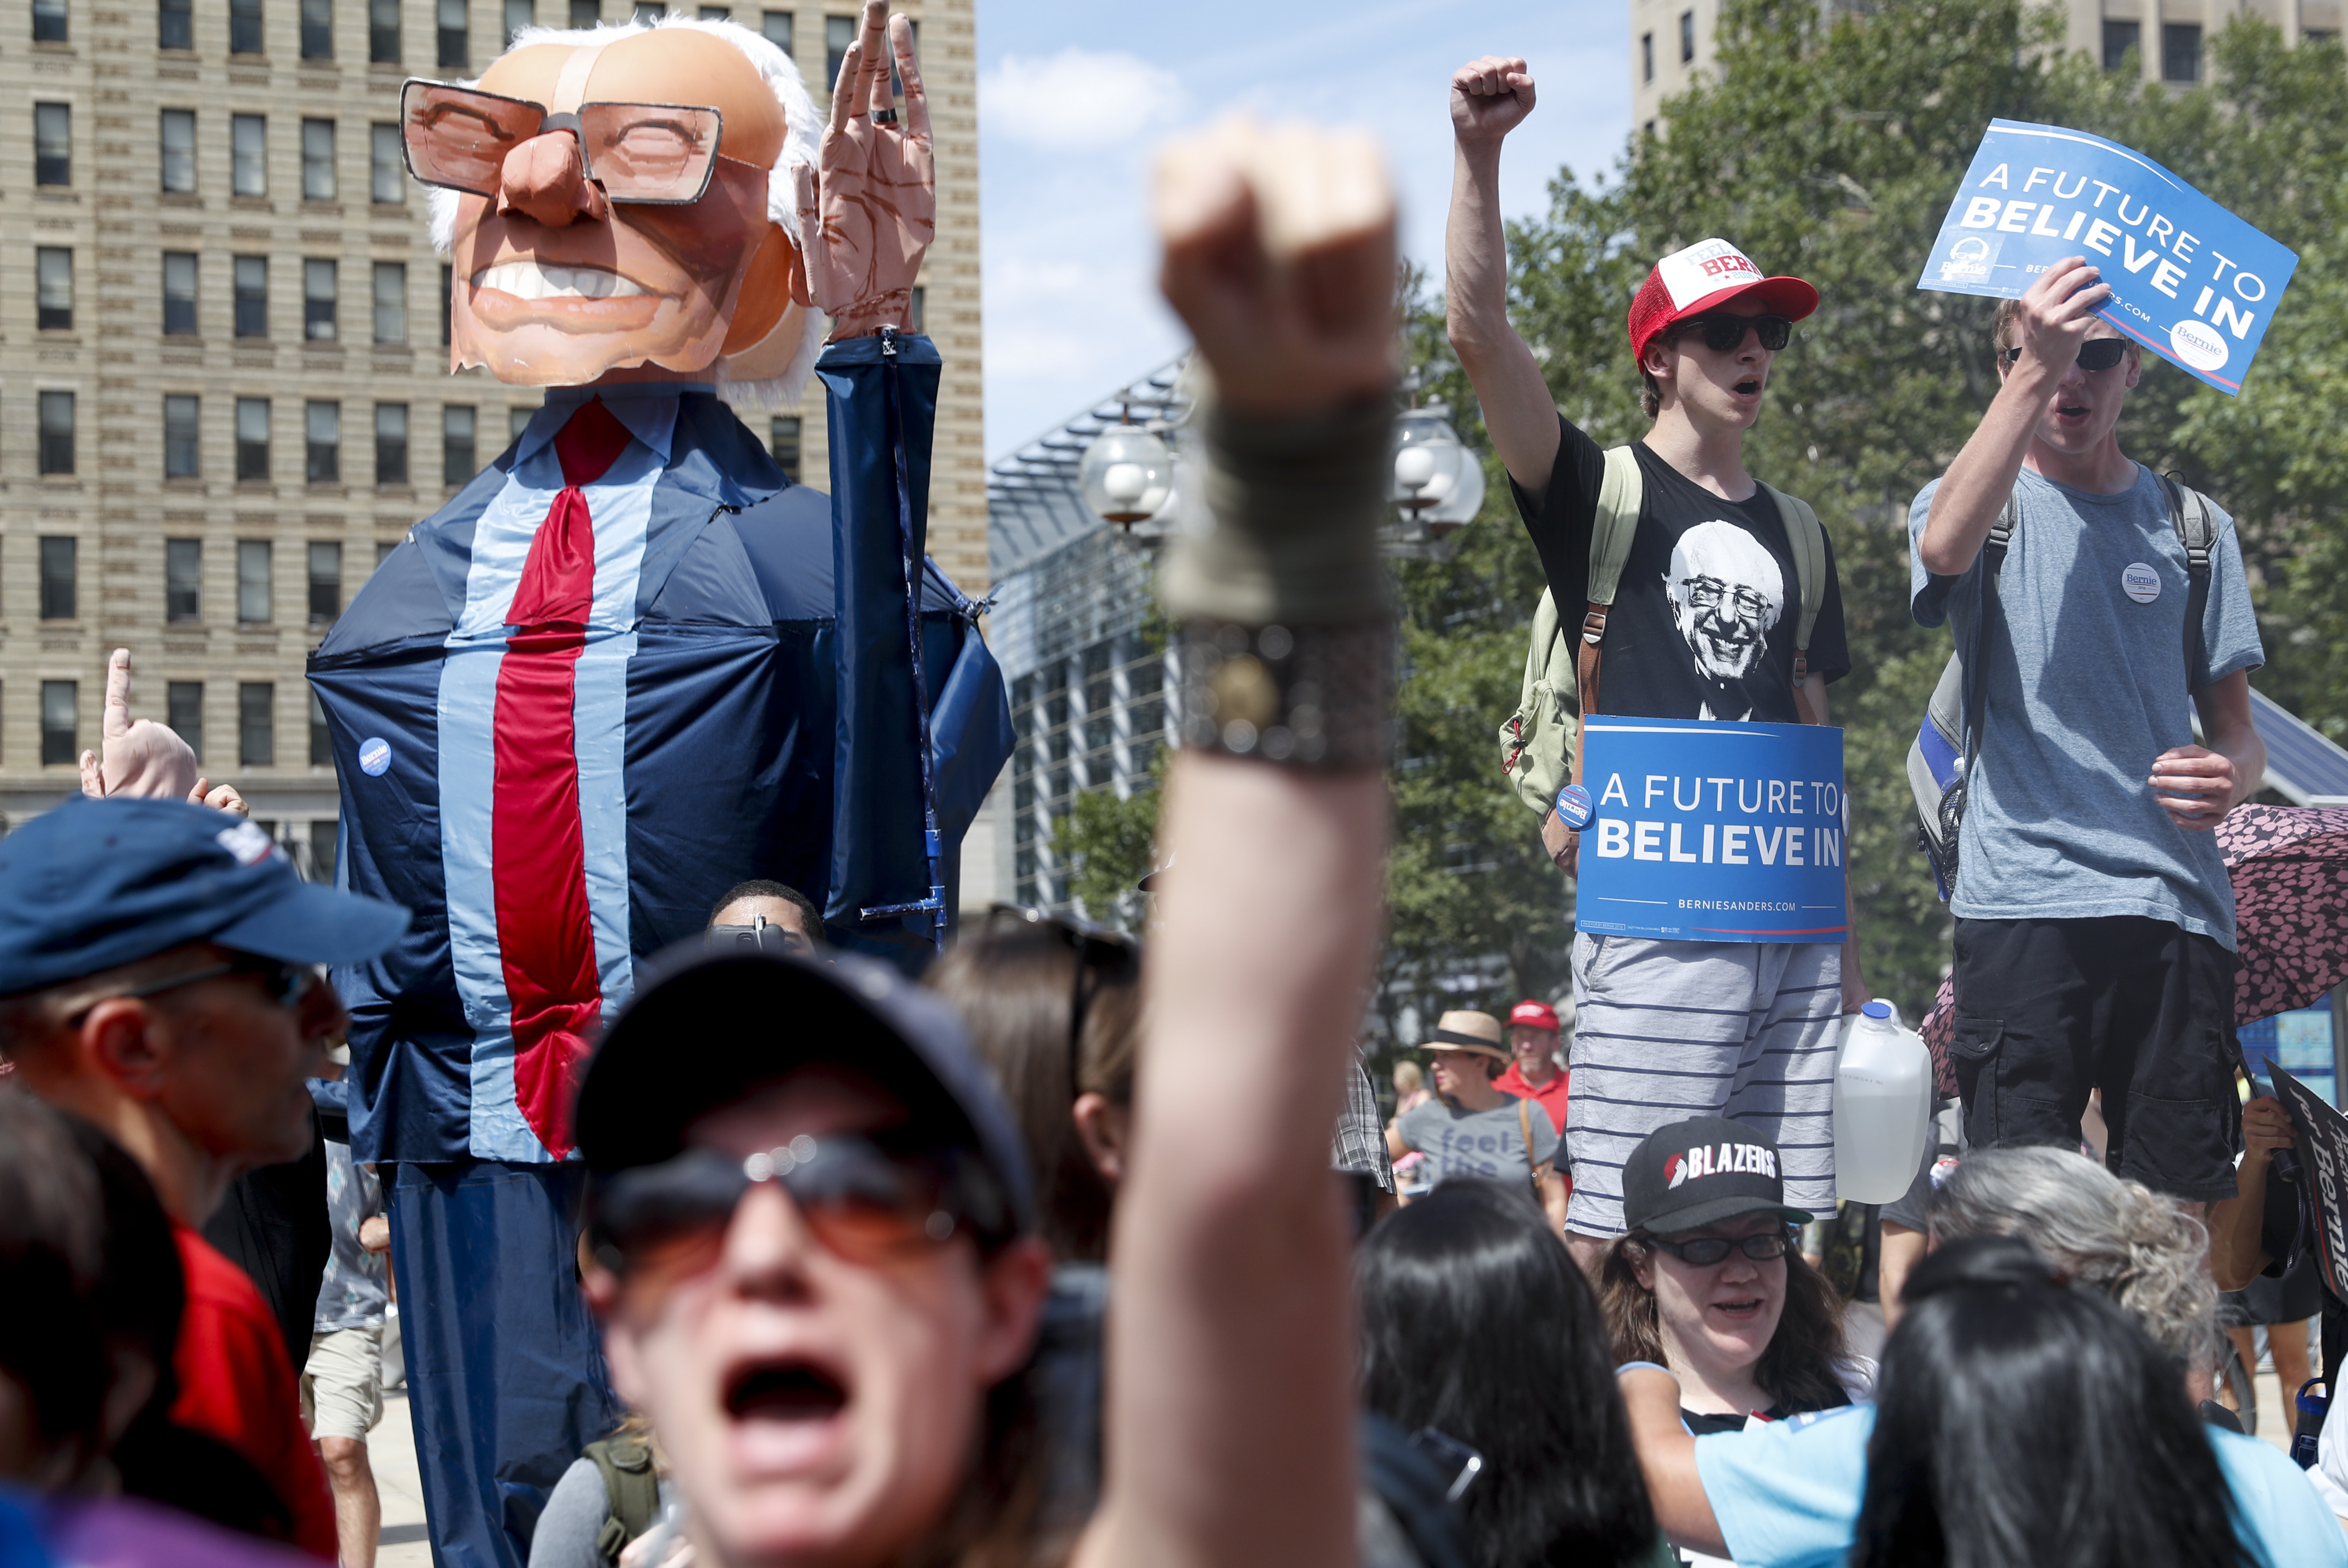 Supporters of Sen. Bernie Sanders, I-Vt., march during a protest in downtown on Sunday, July 24, 2016, in Philadelphia. (AP/John Minchillo)